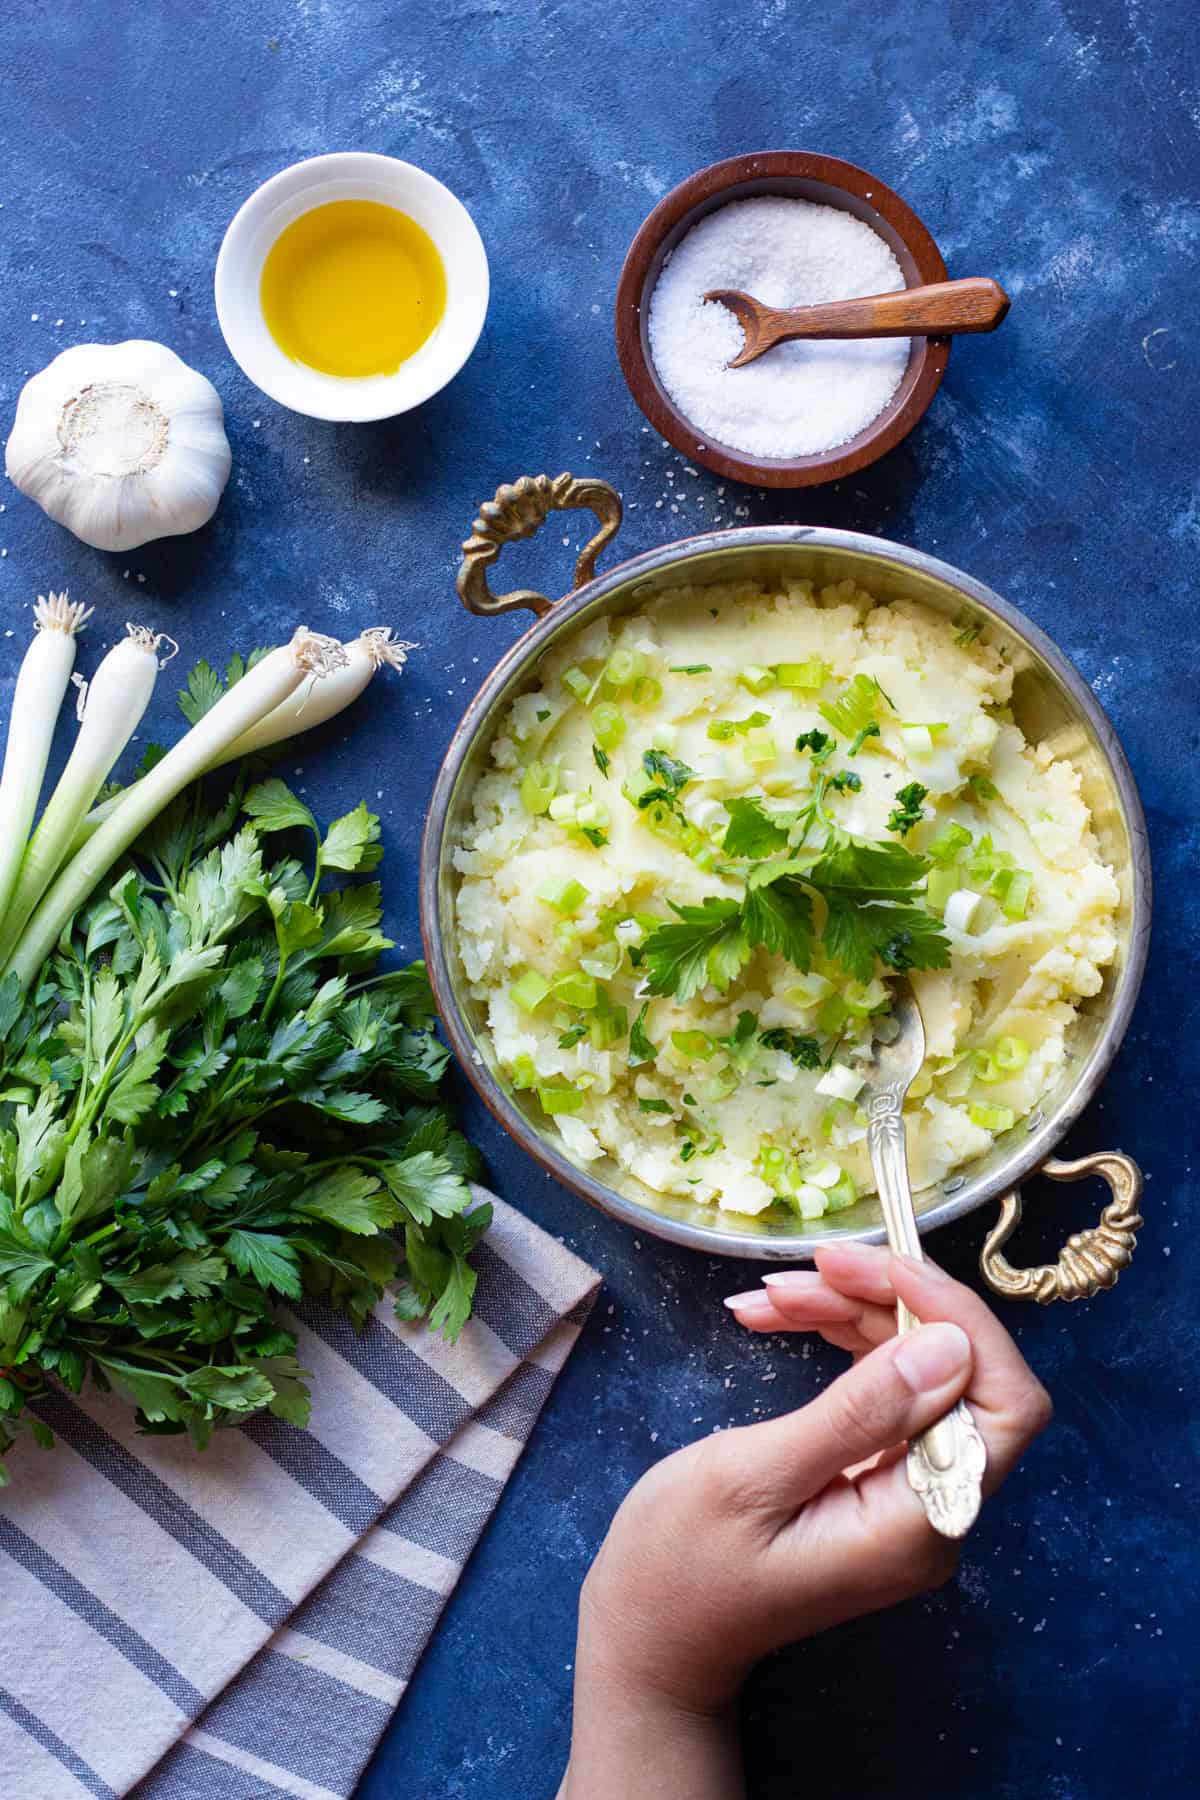 Skordalia is a popular Greek potato and garlic dip that's creamy and so tasty. Watch the video to learn how to make this traditional Greek dip with just a few ingredients. 